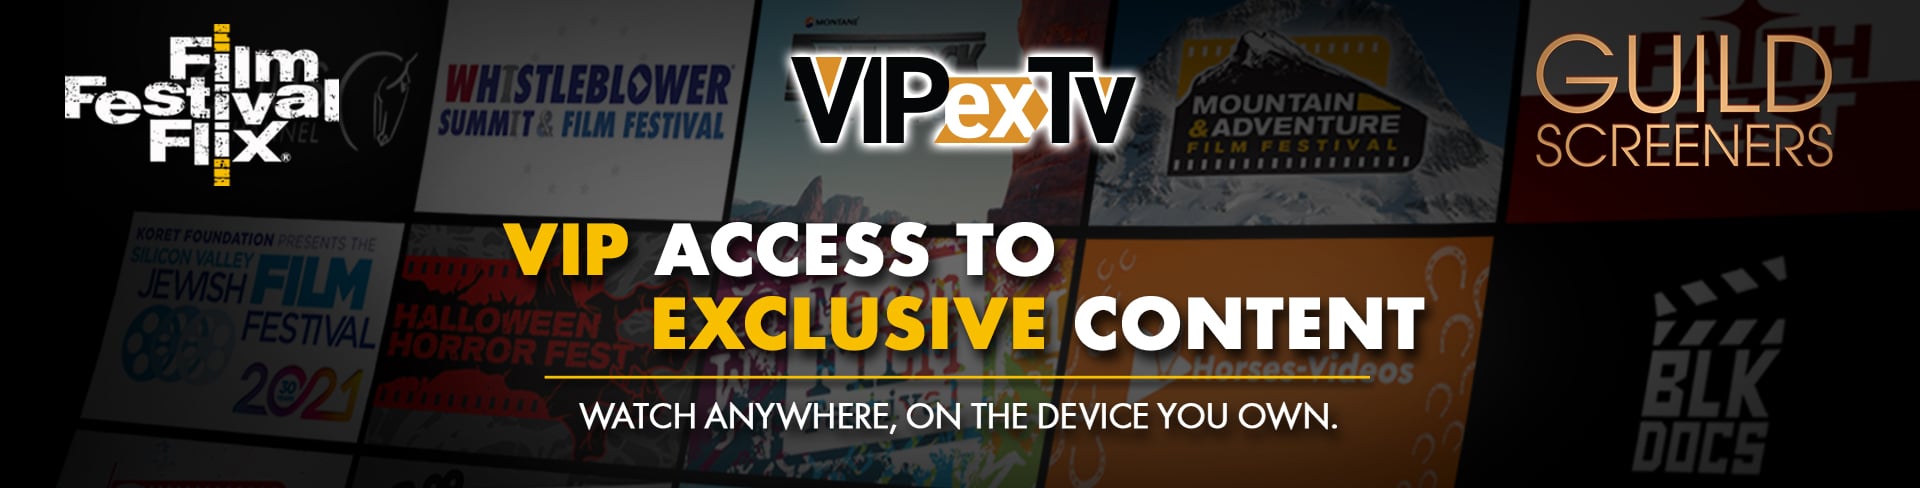 Launch your own personal, private, and secure streaming channel on one of our platforms. Film Festival Flix - a private and secure virtual venue for festivals and events. Guild Screeners - a Screen Actors Guild approved private and secure streaming platform for awards campaigning and press and industry private screenings. VIPexTV - Exclusive access to VIP content for artists, athletes, and family events. Control your content, communications, and voice. Own your audience!